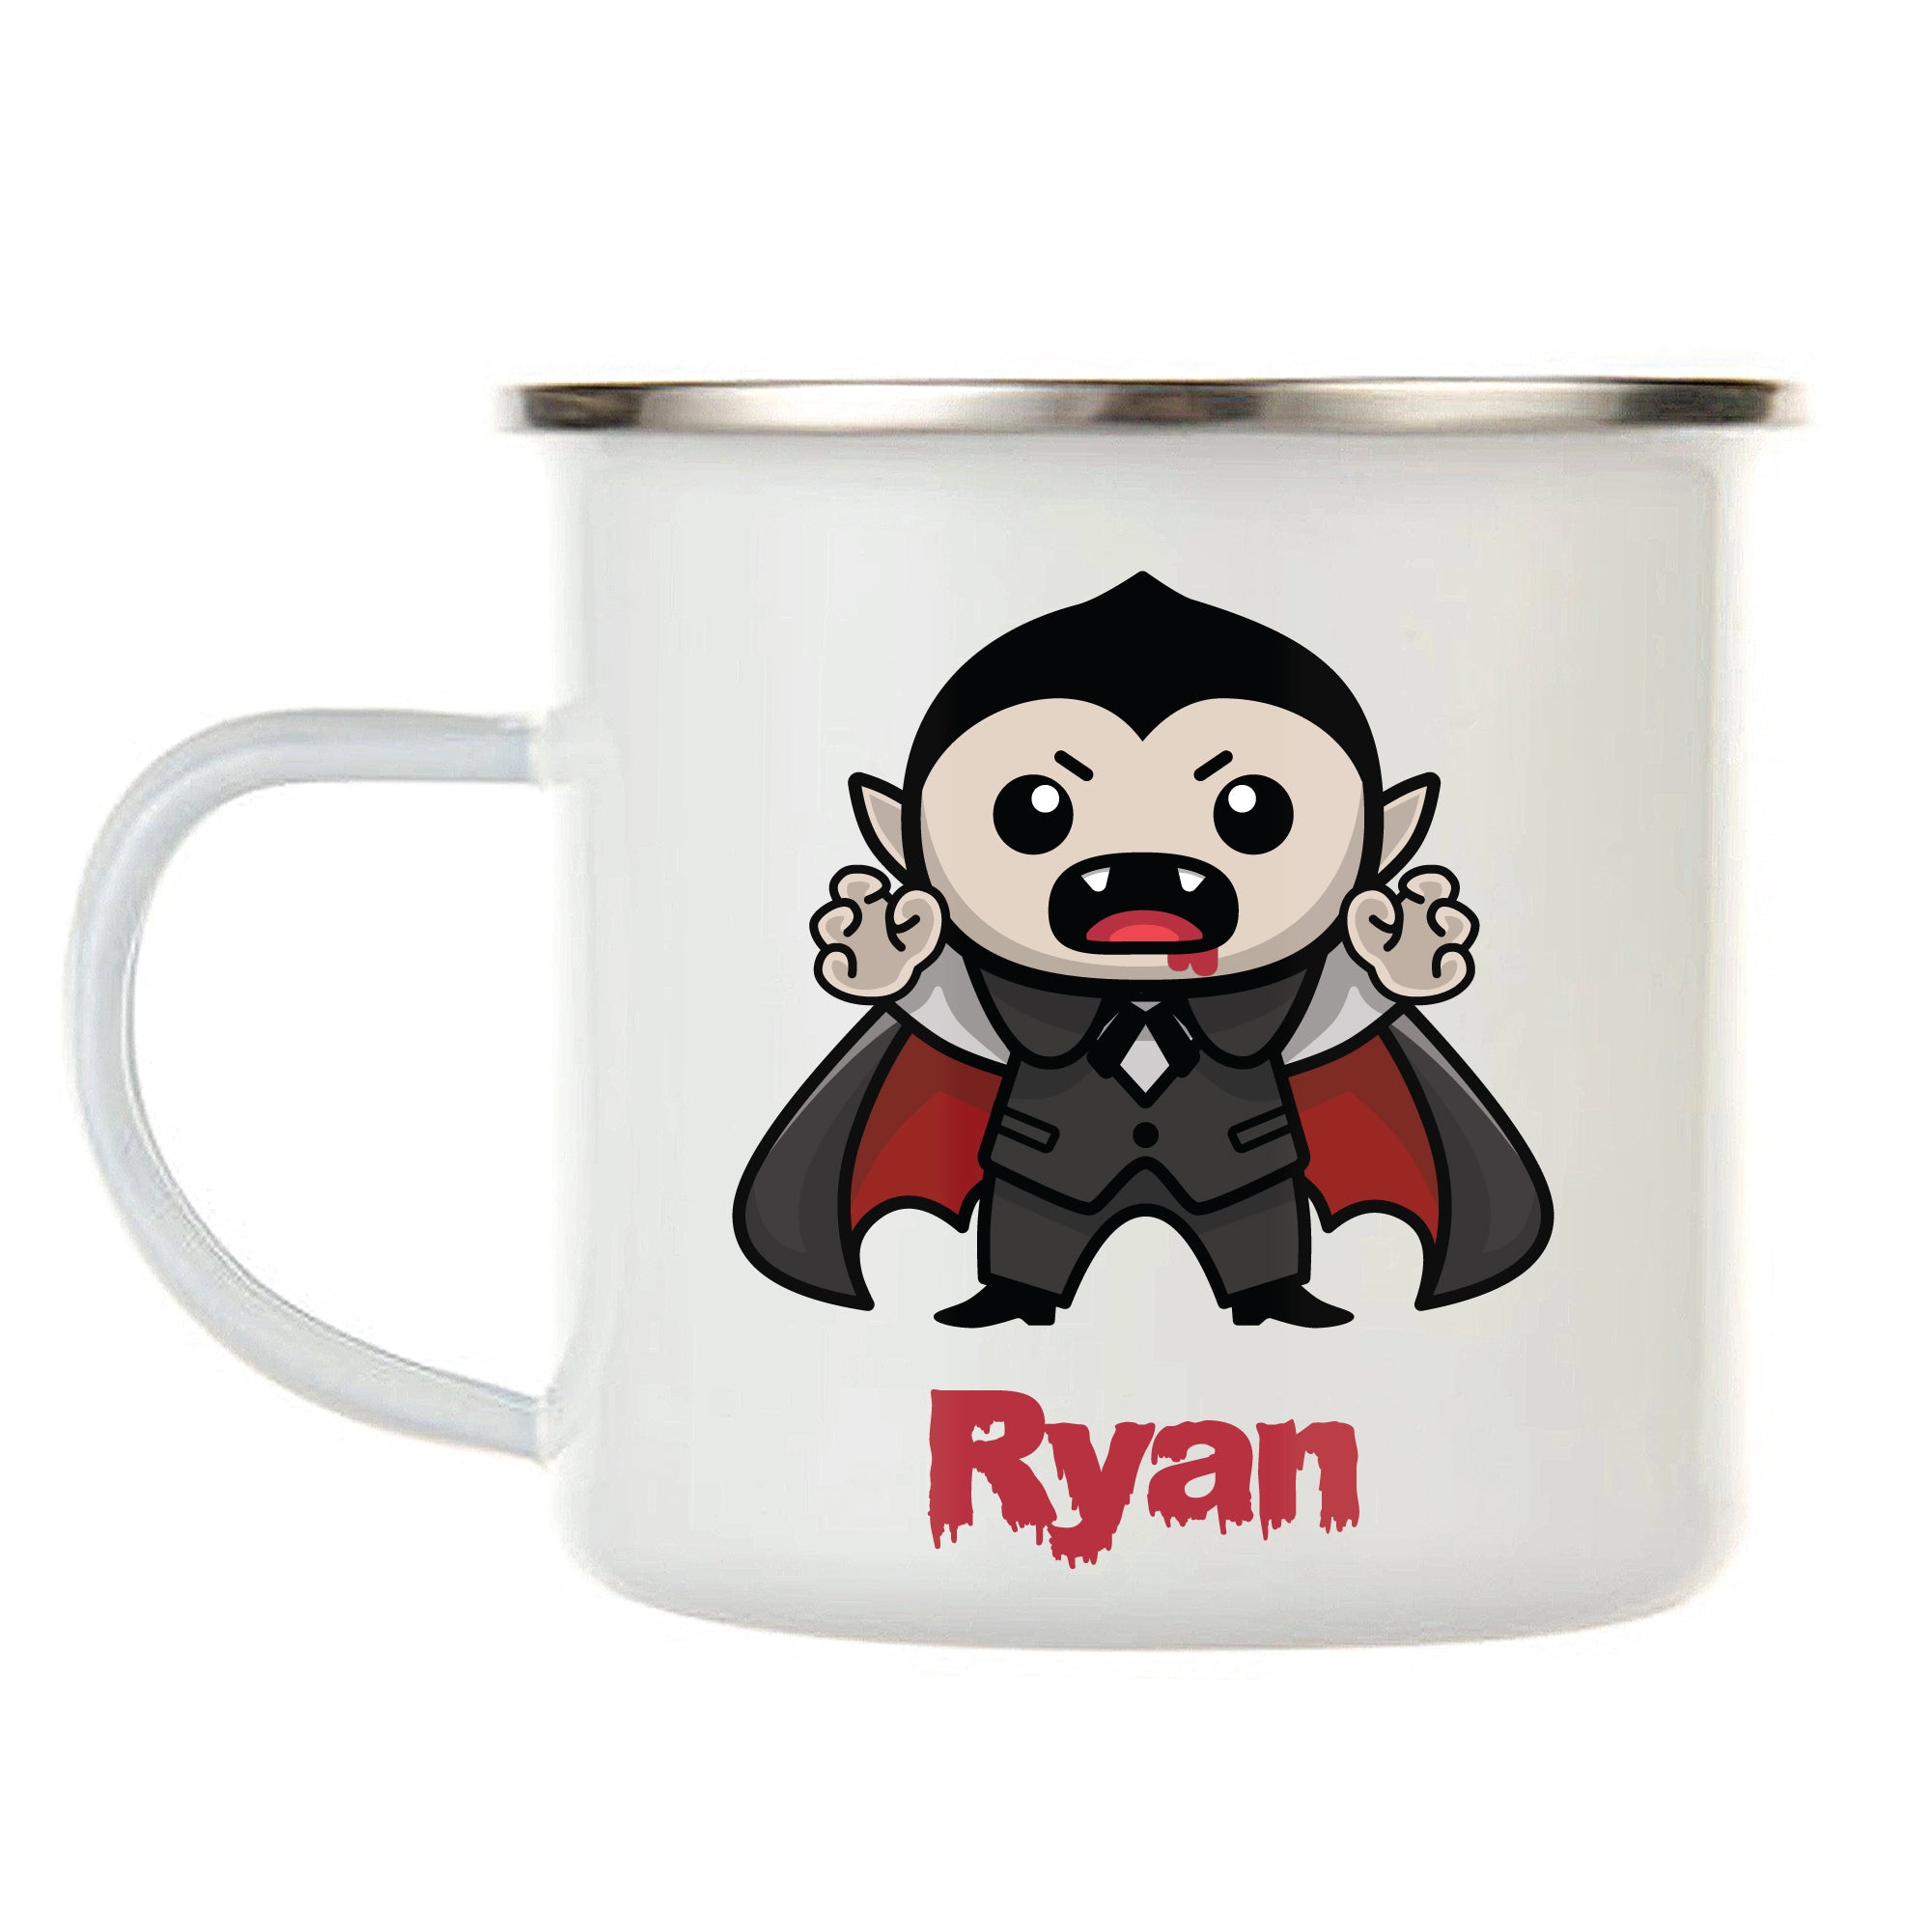 Kids Personalized 12 oz. Stainless Steel & Enamel Camp Mug with Vampire